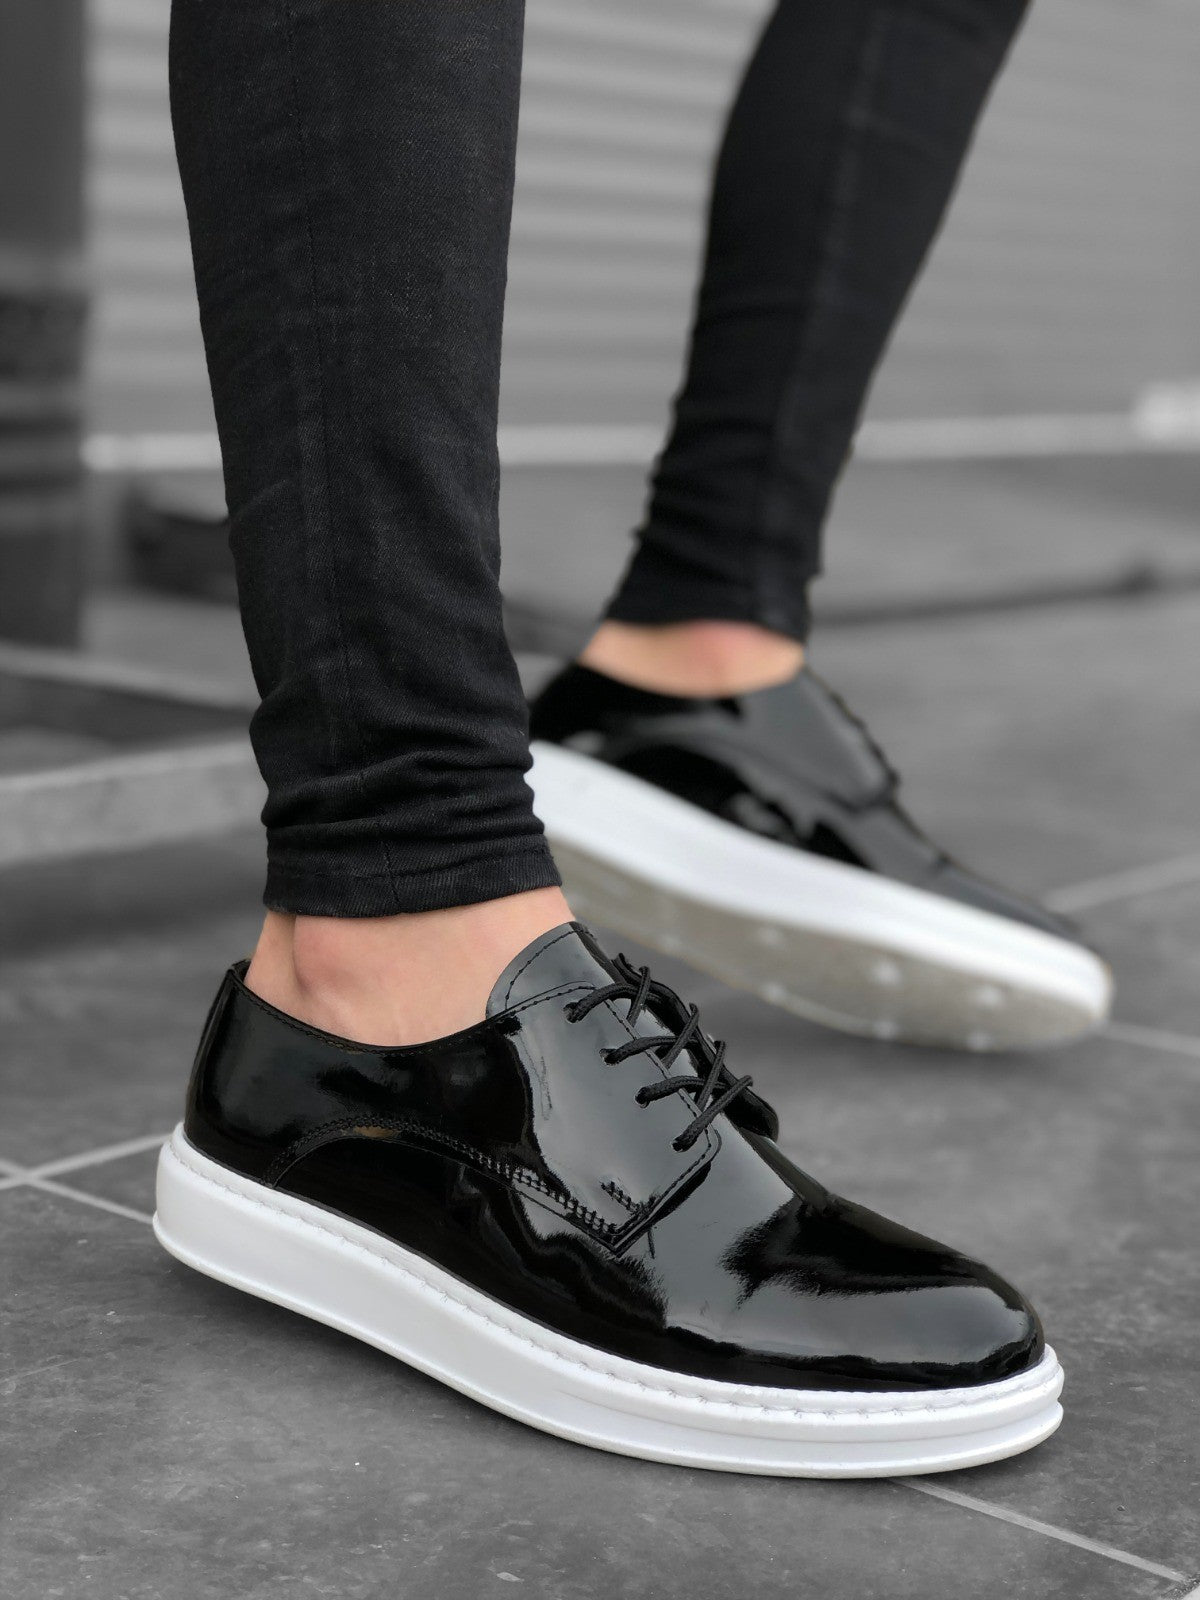 BA0003 Lace-Up Classic Black Patent Leather High Sole Casual Men's Shoes - STREETMODE ™